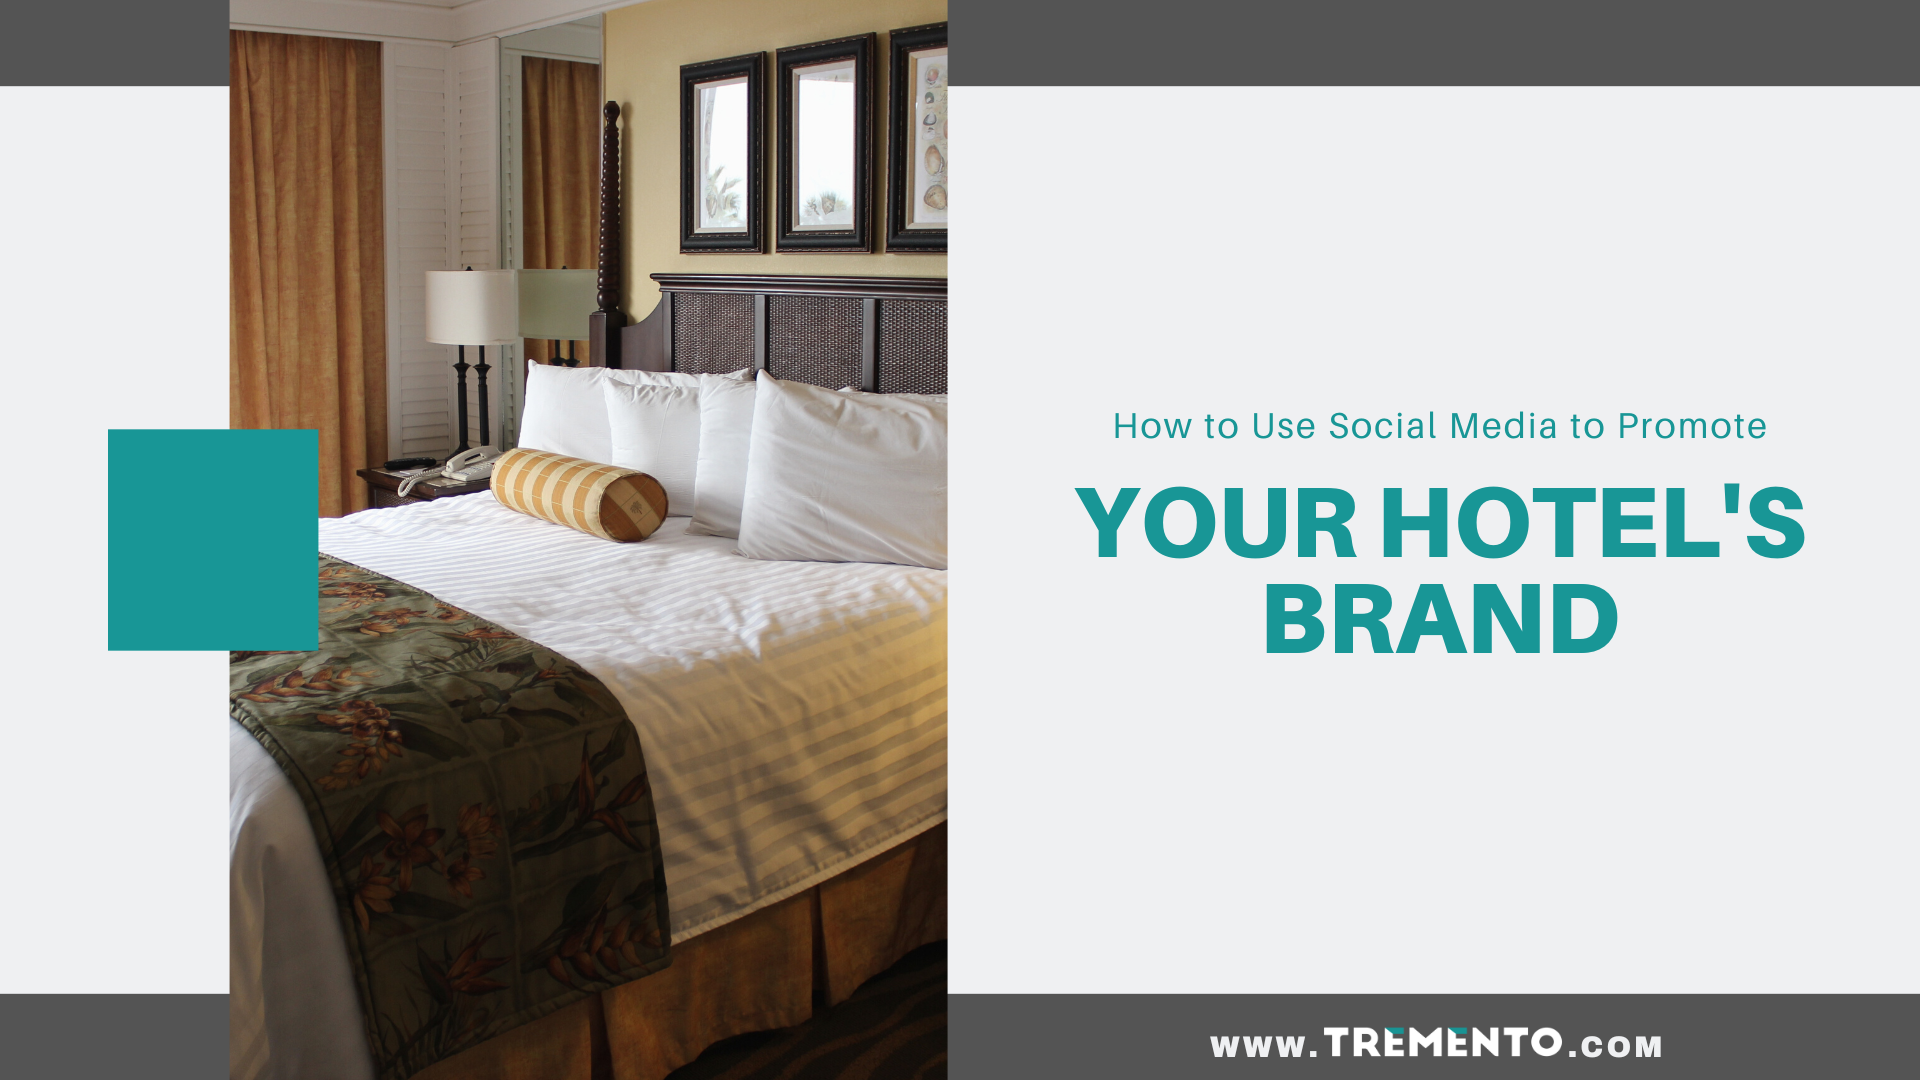 How to Use Social Media to Promote your Hotel's Brand